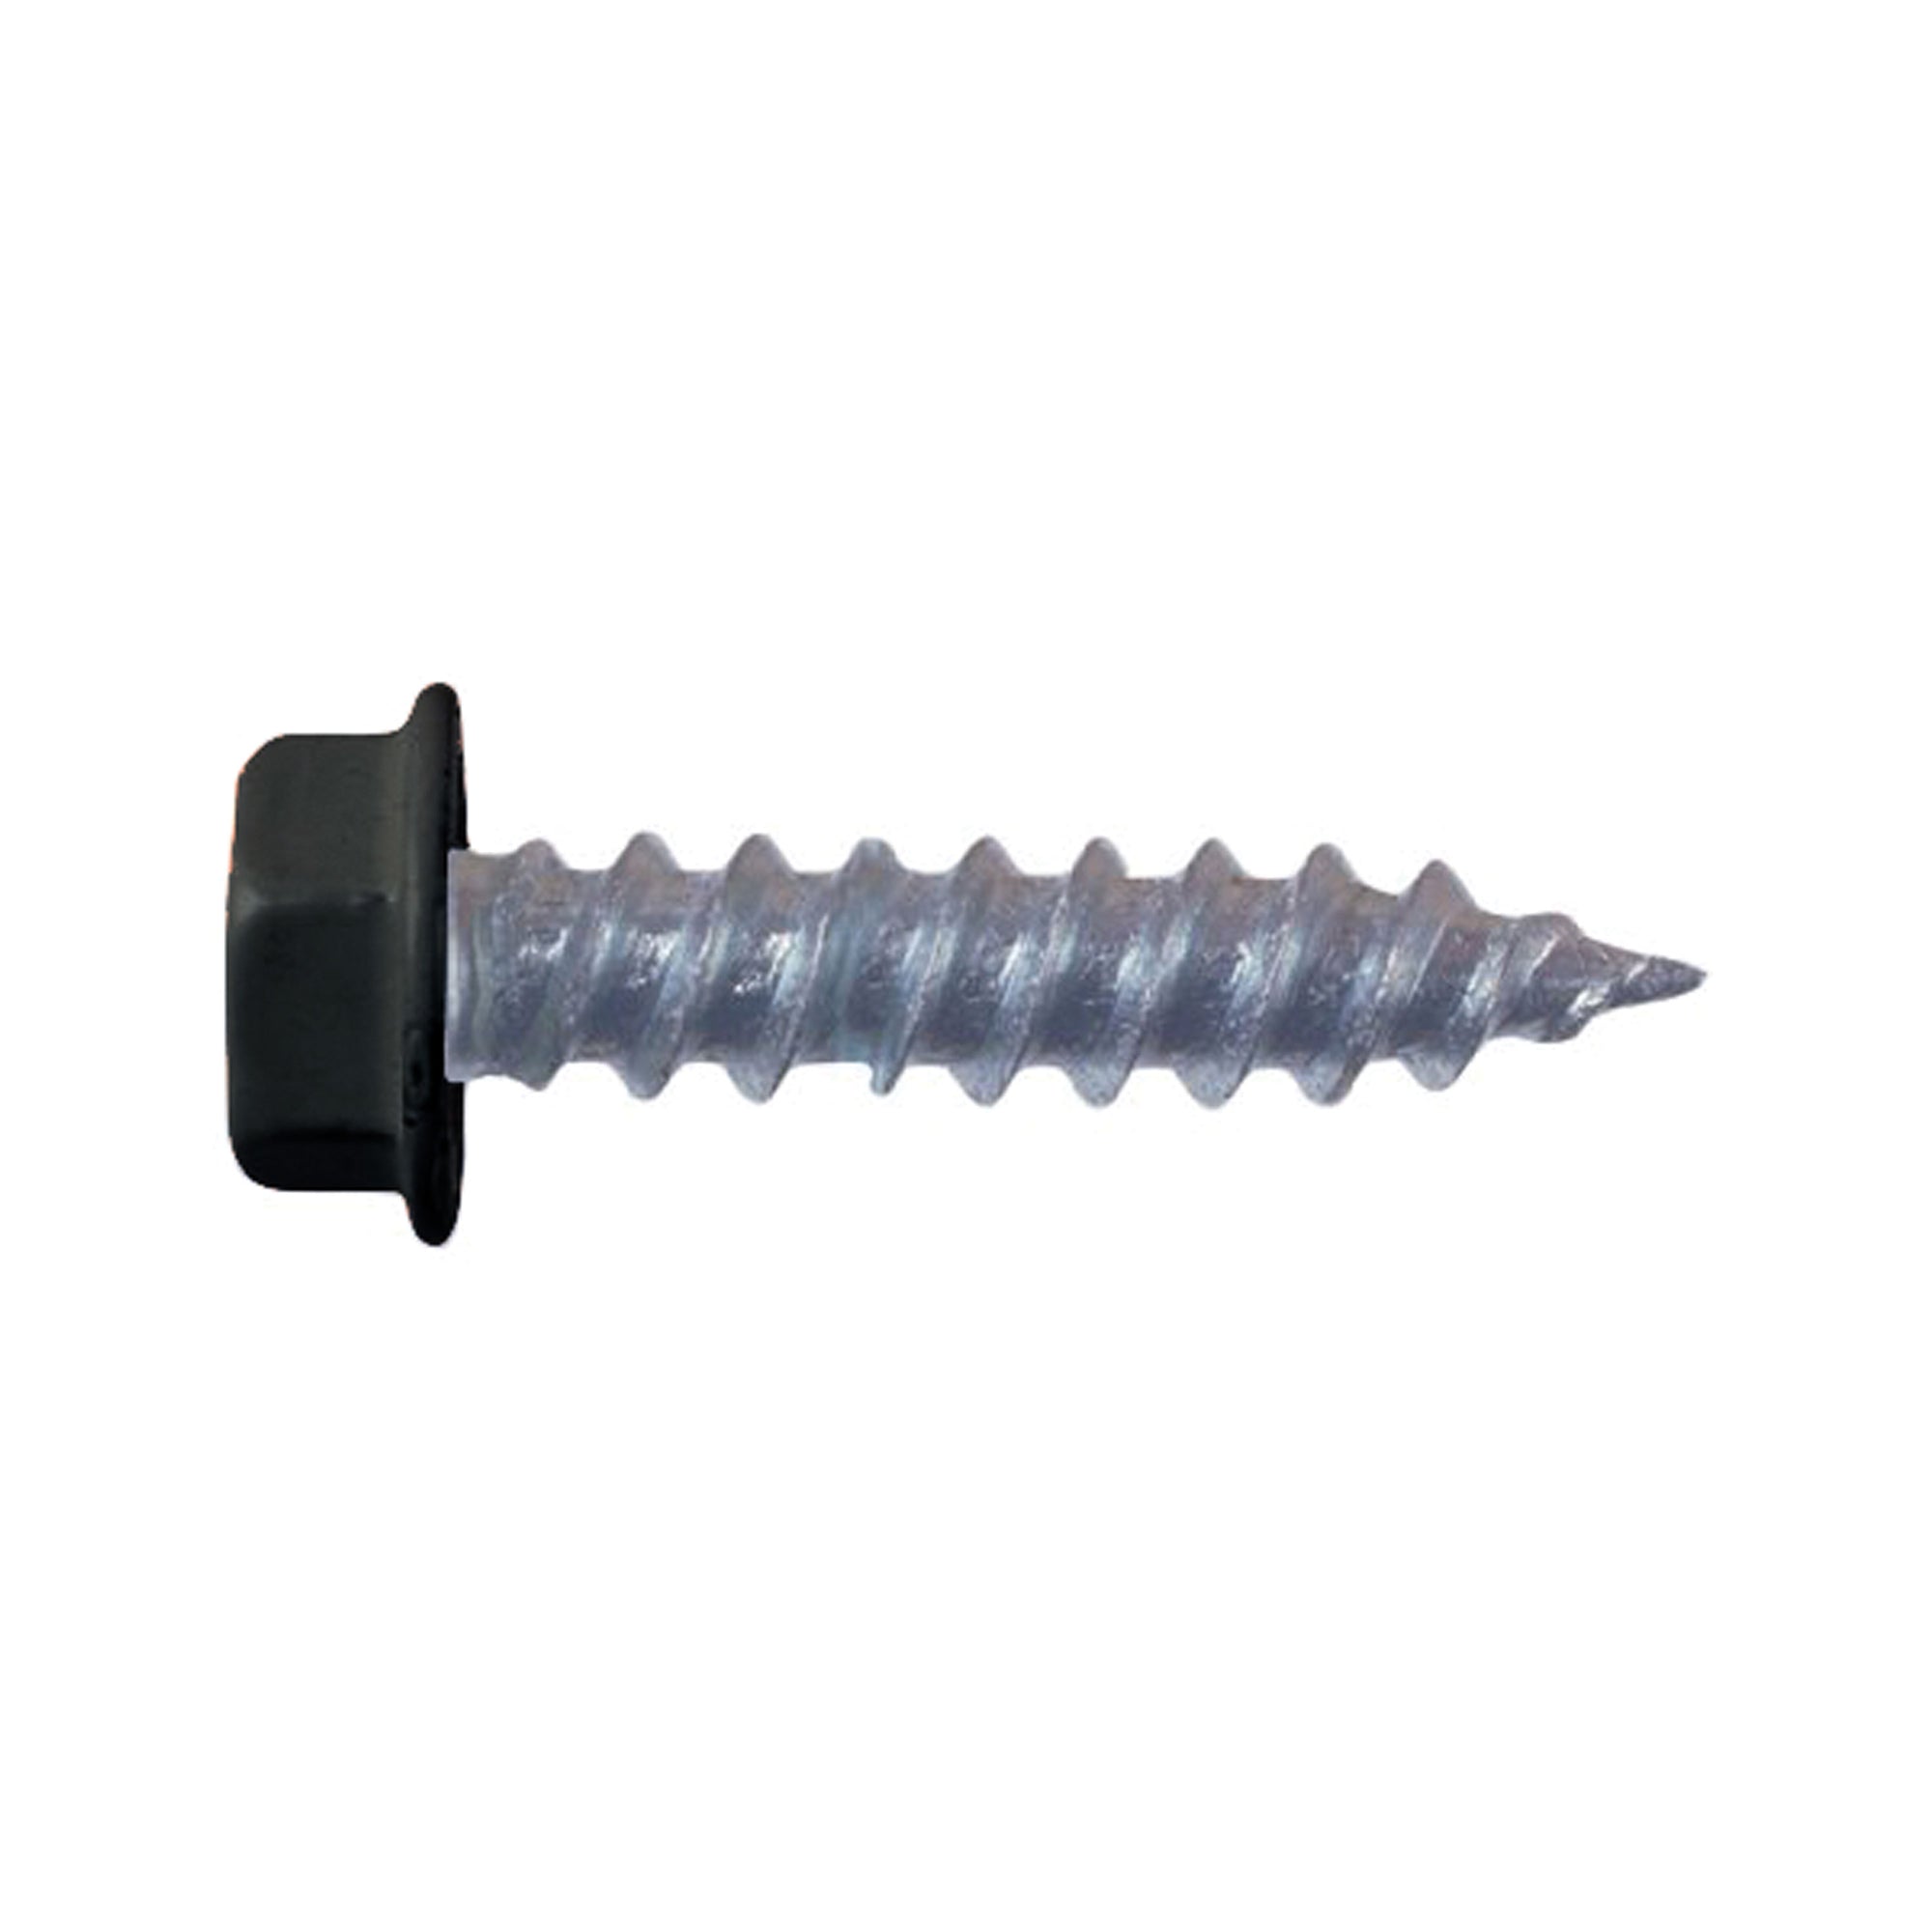 AP Products 012-TR500 BL 8 X 3/4 Black #8 Hex Washer Head Screw - 3/4 in., Pack of 500